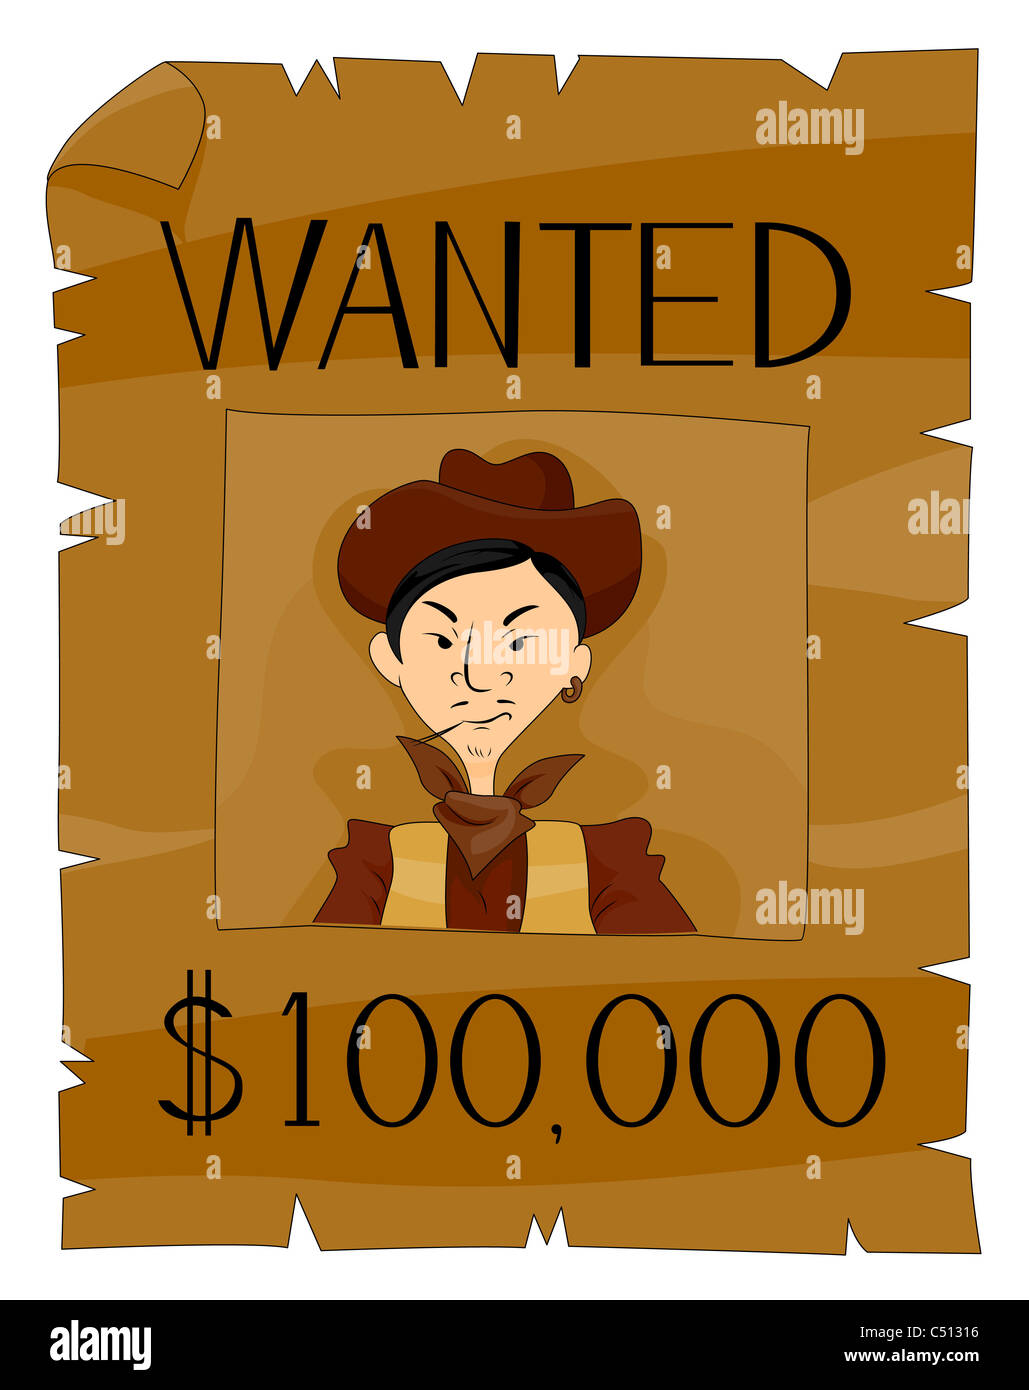 Wanted Poster with clipping path Stock Photo